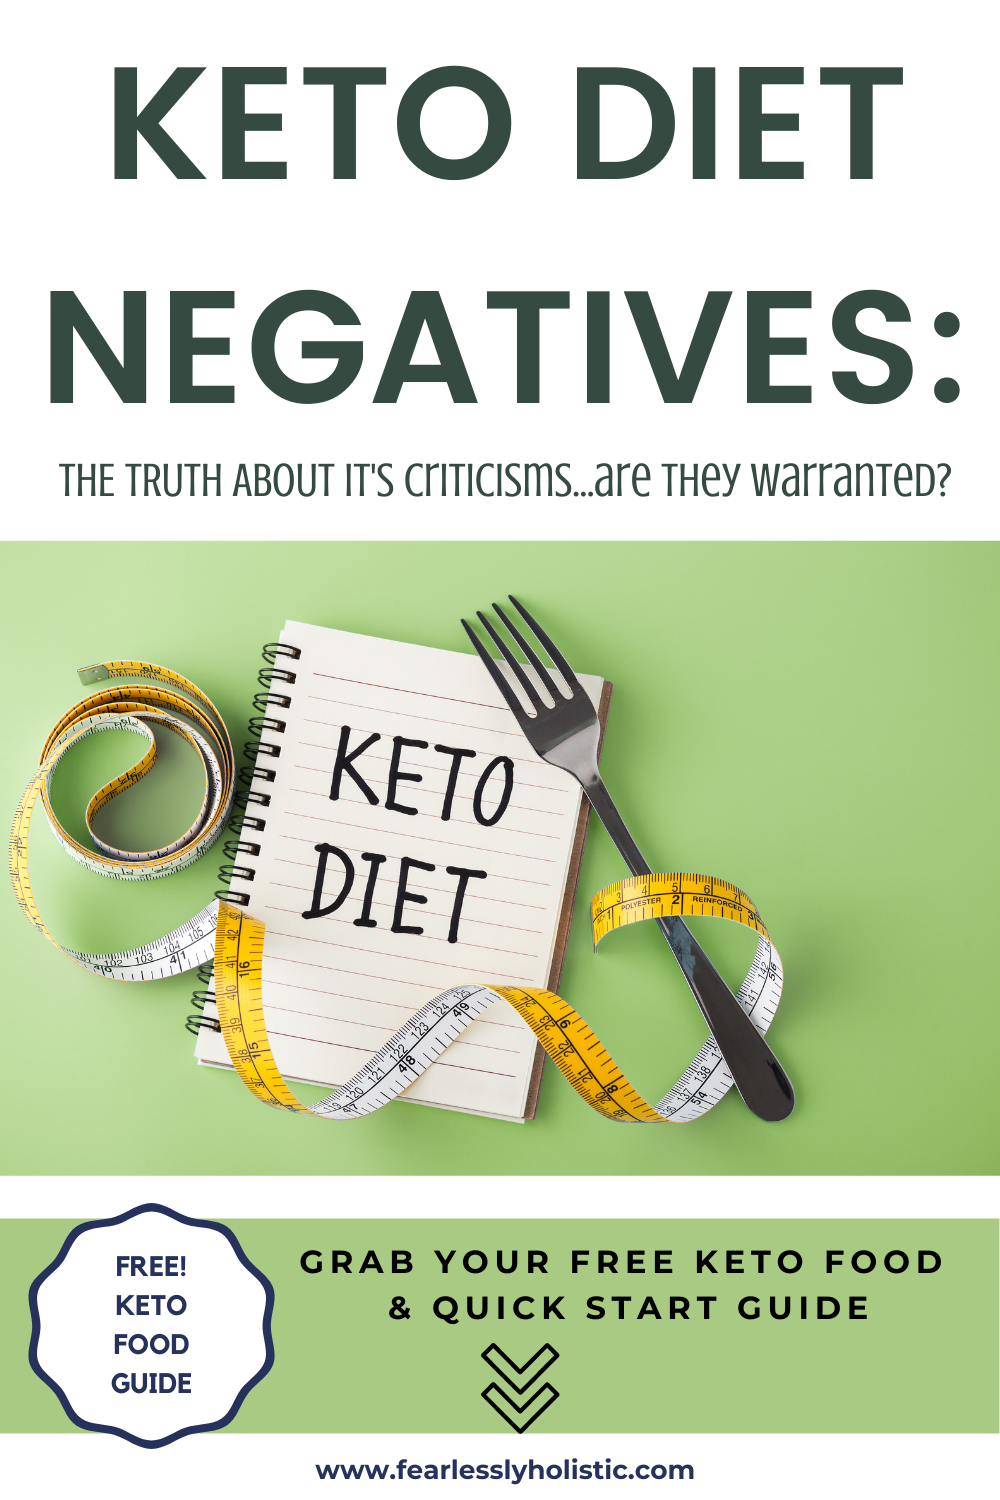 Keto Diet Negatives: Are They Legit?